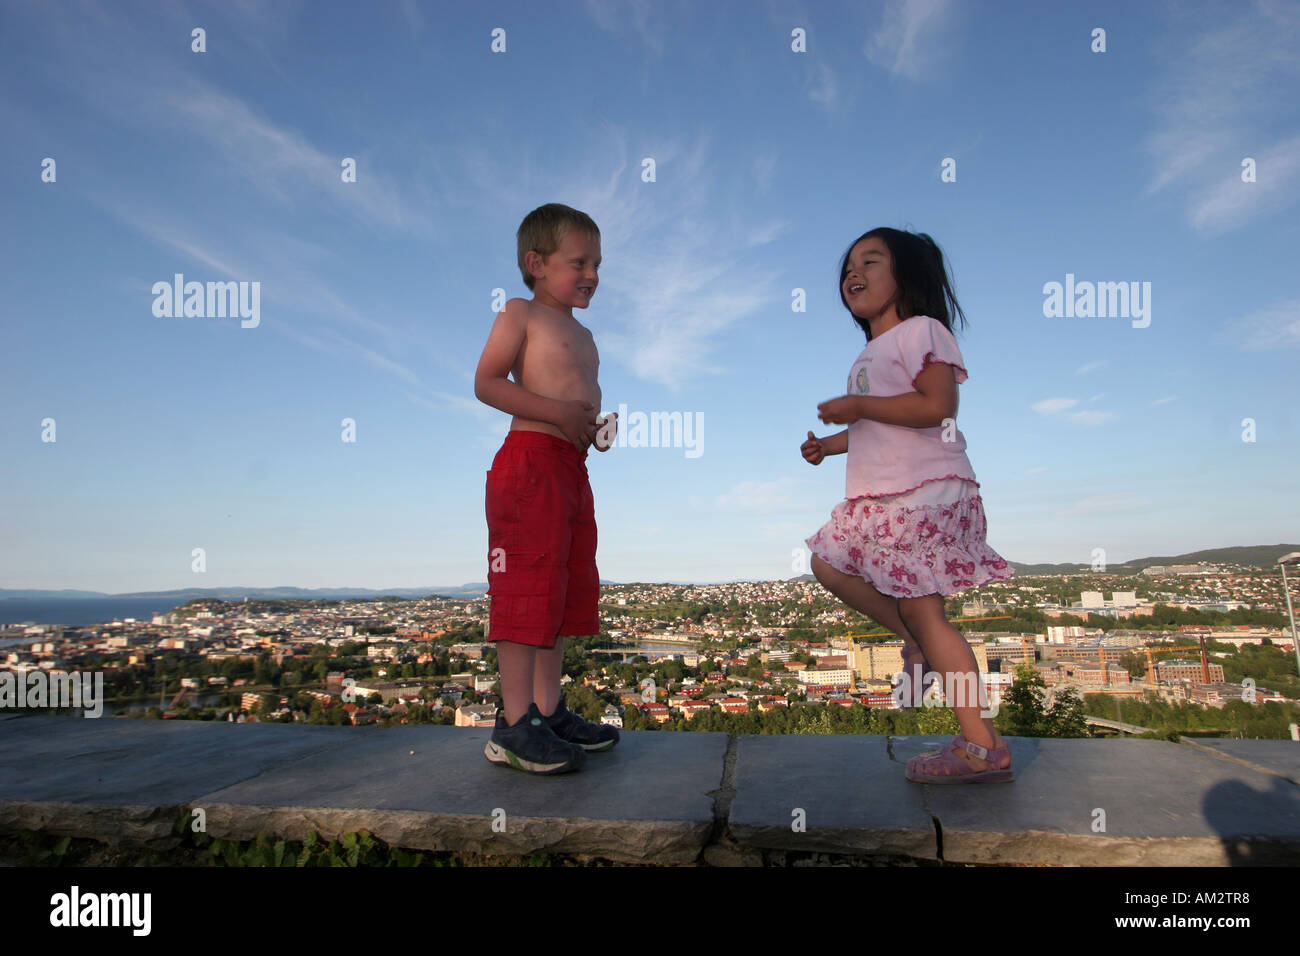 boy and girl playing wide low horizontal view Stock Photo